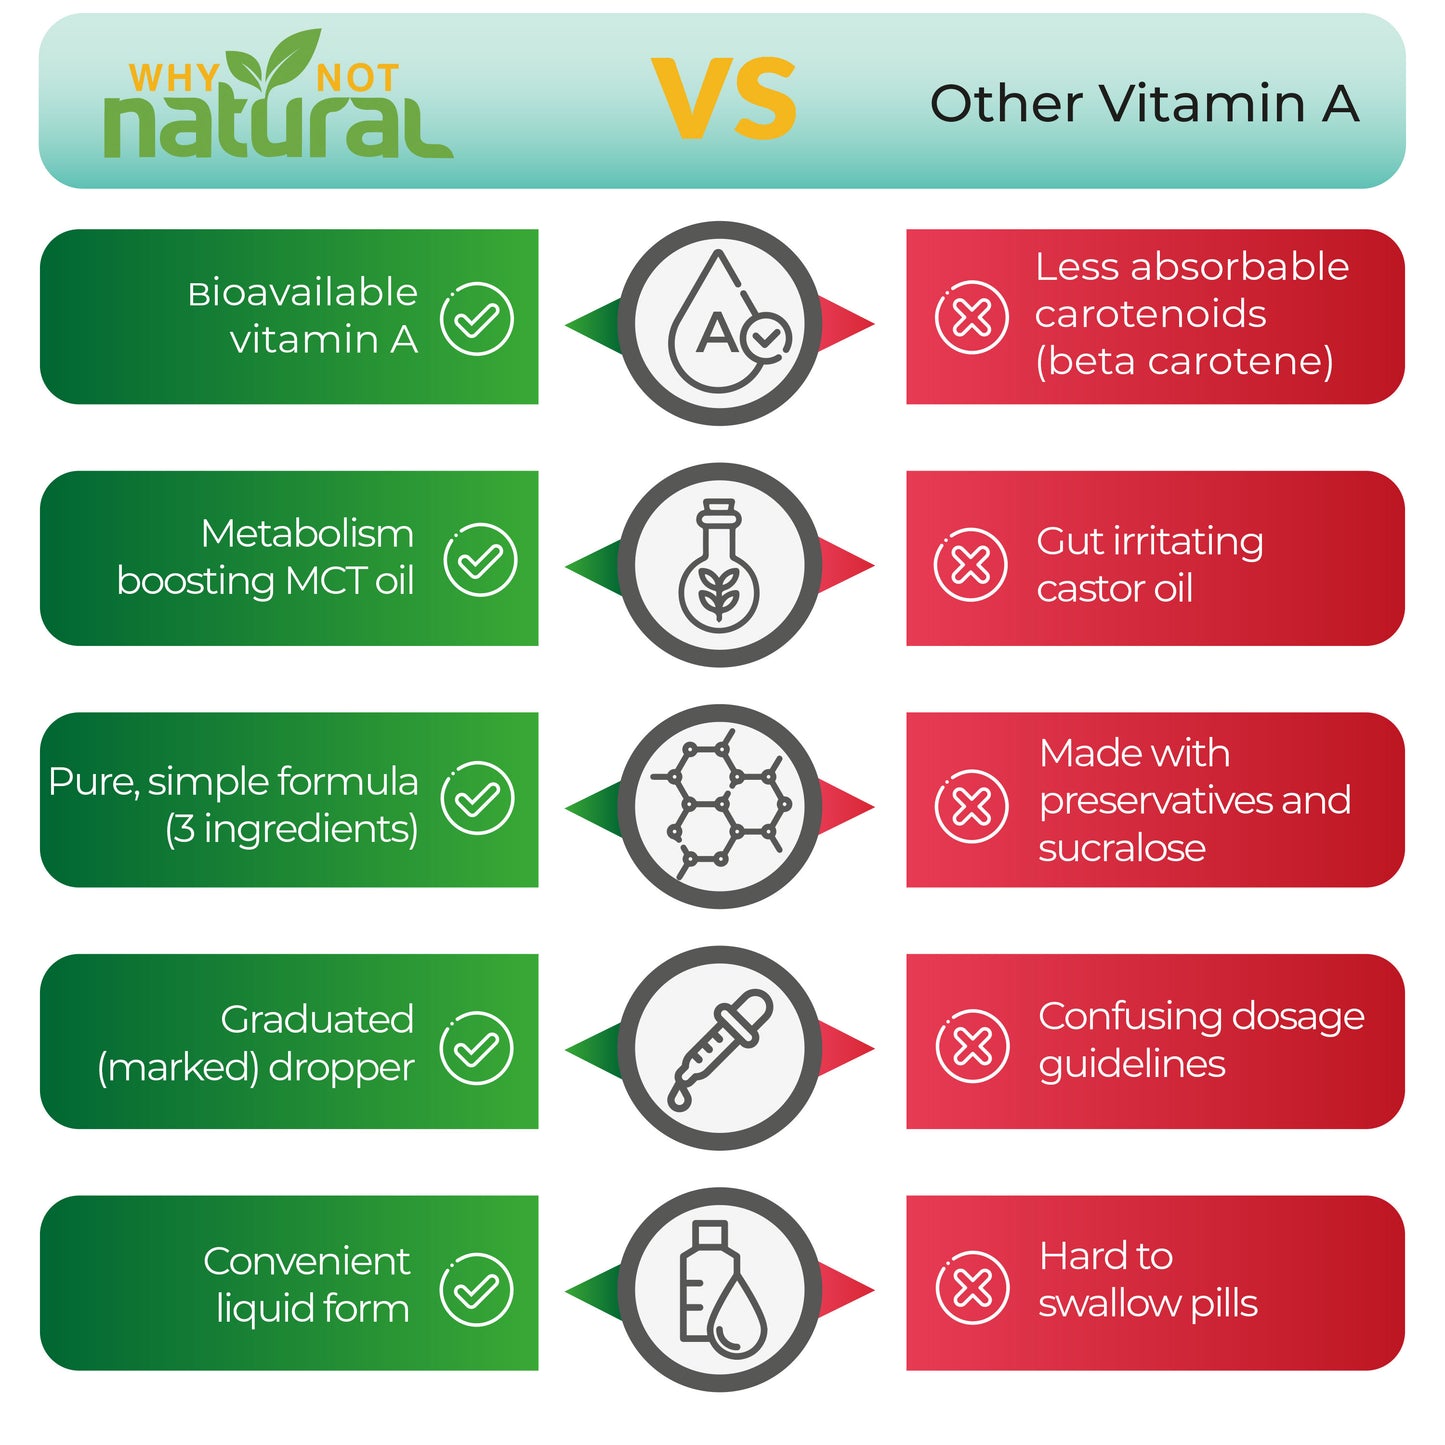 Why Not Natural vs Other Vitamin A